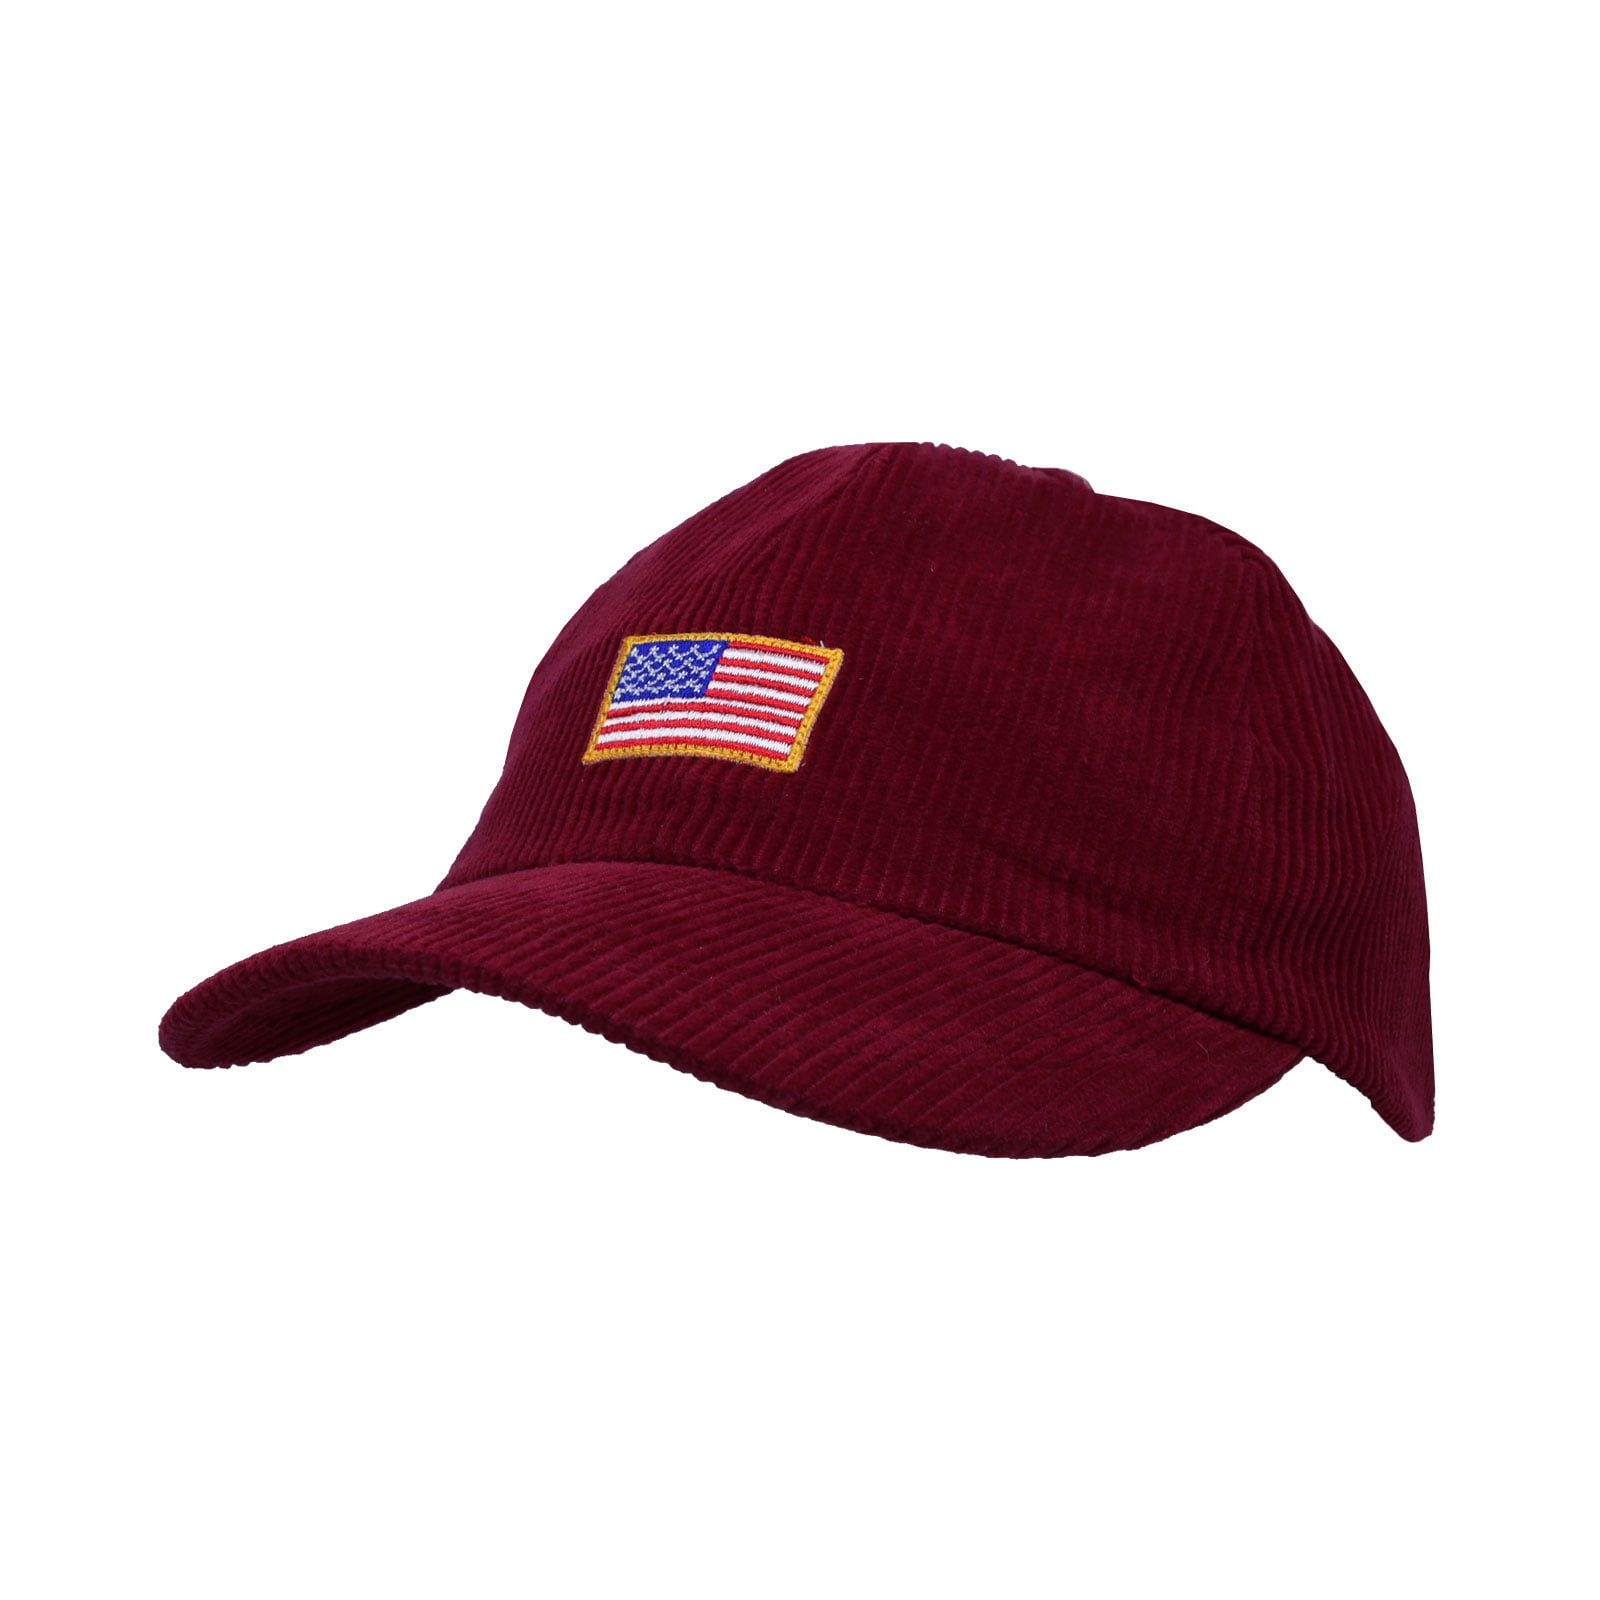 Jeep American Flag Cap Adjustable Navy/Red 